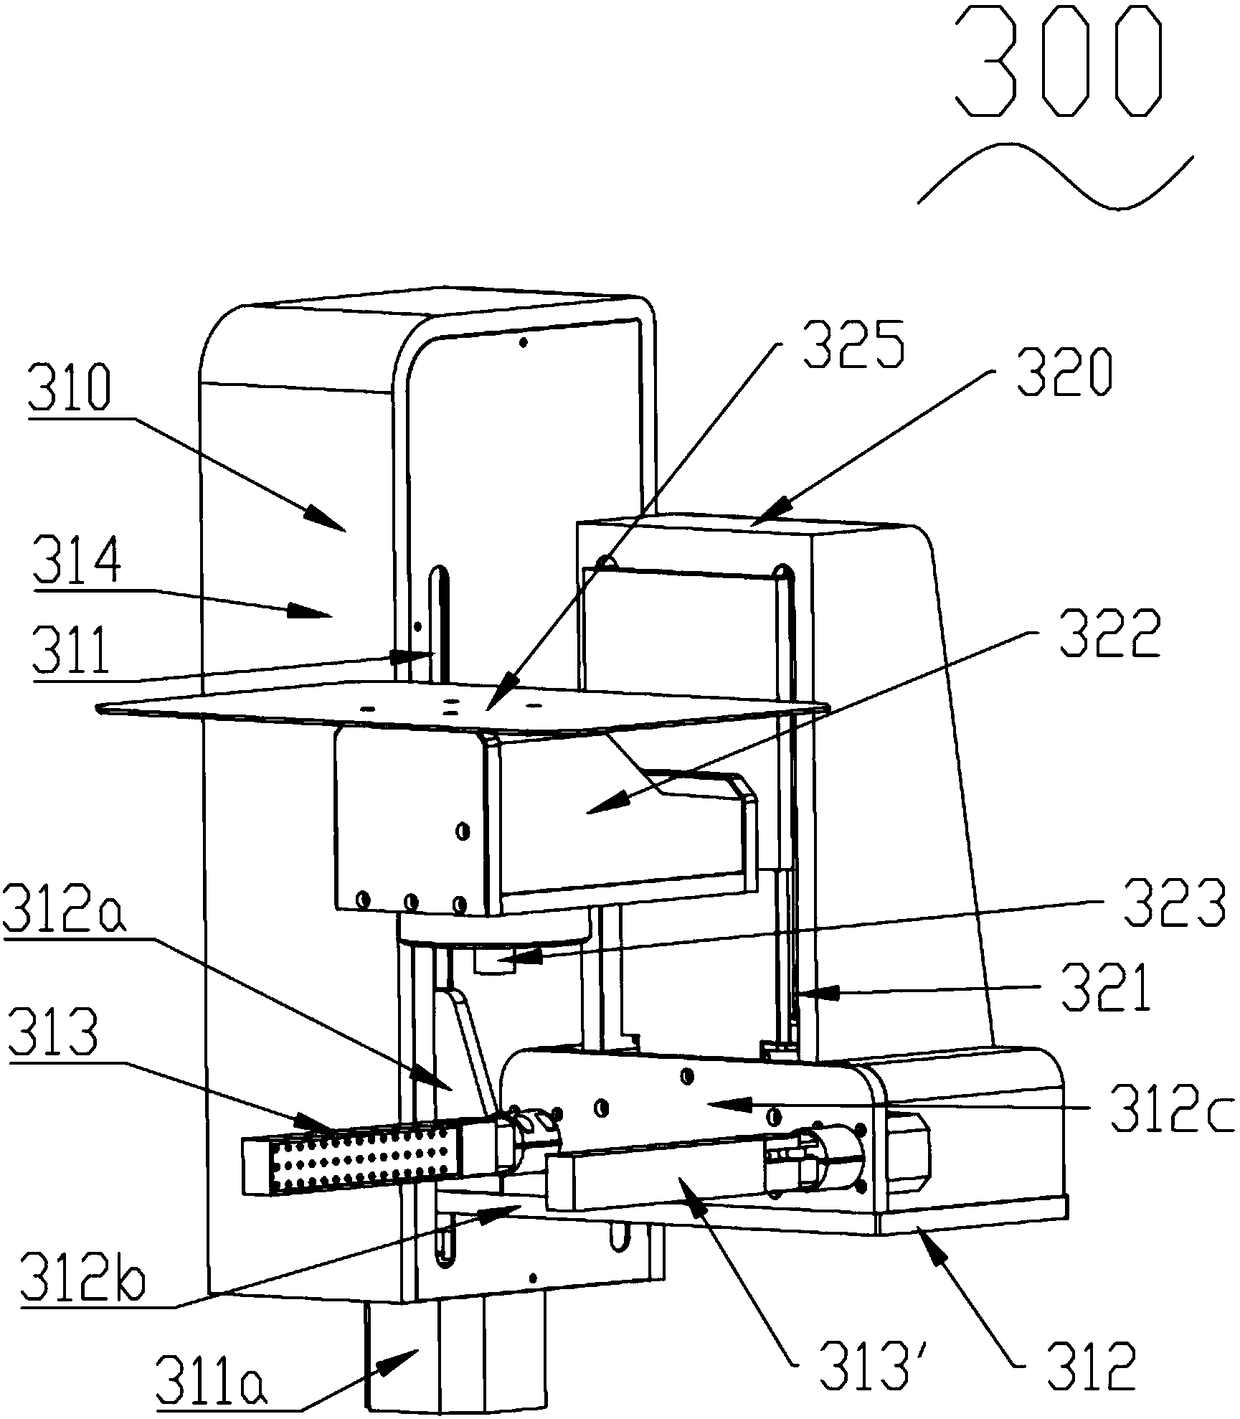 Image collection device and tobacco laser code recognition equipment